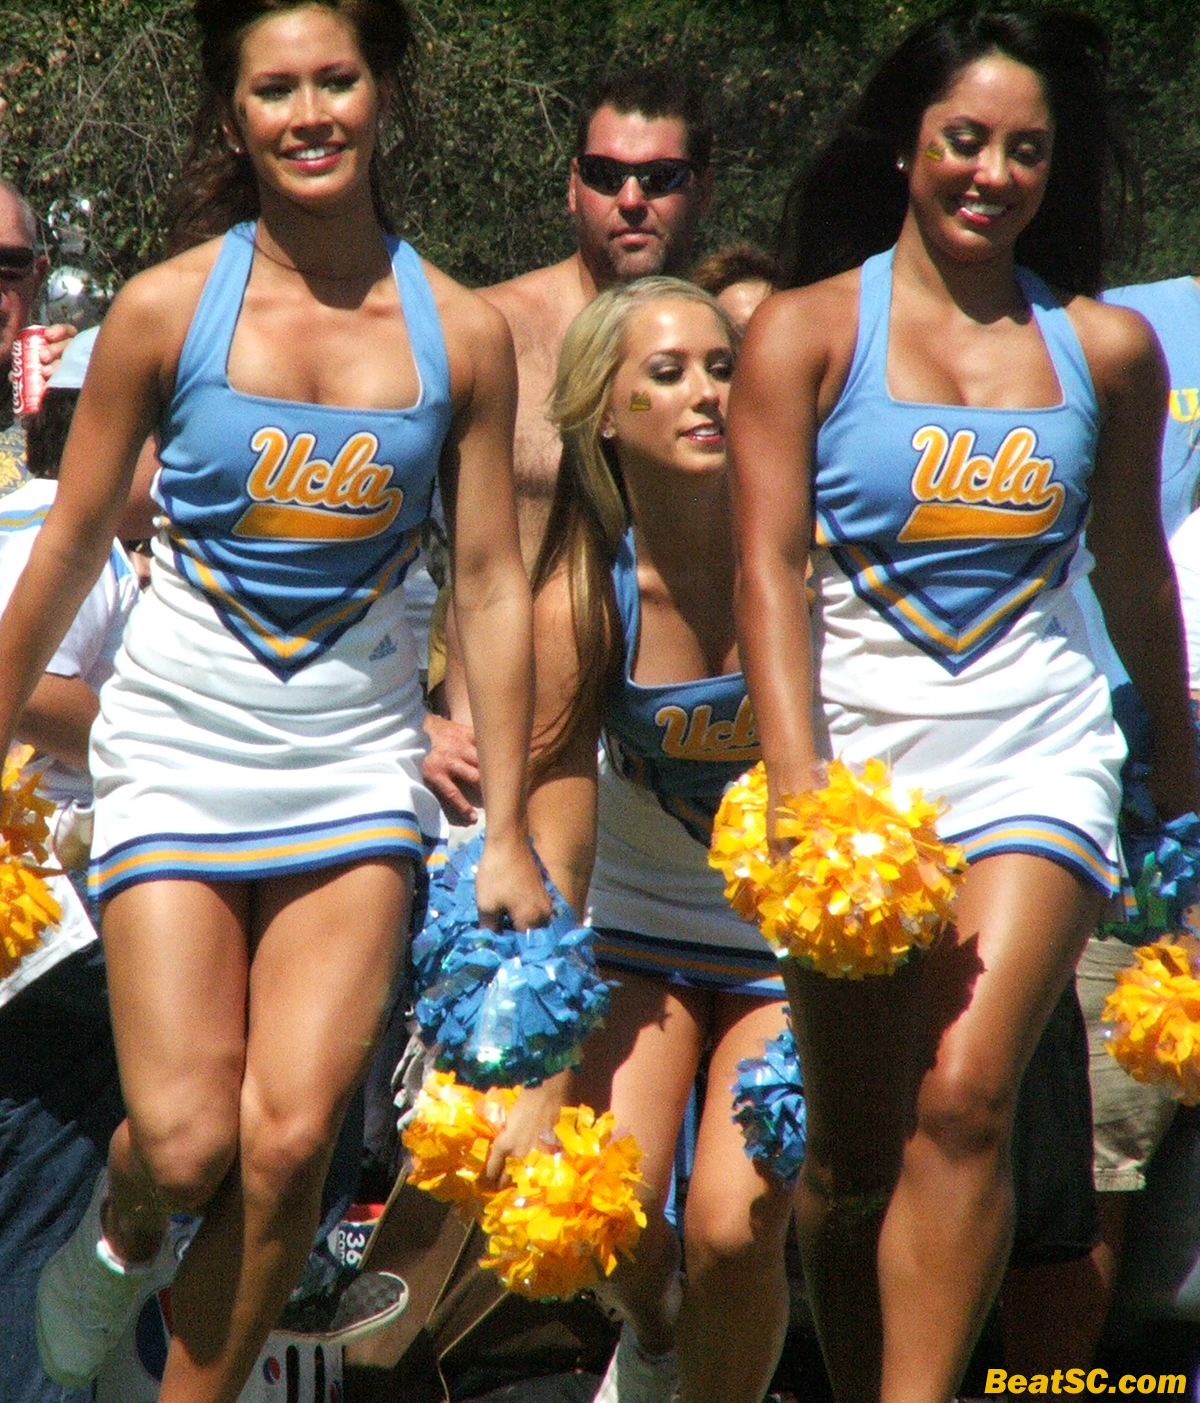 The UCLA Spirit Dynasty remains Unbeatable despite Turnover, and the Footba...